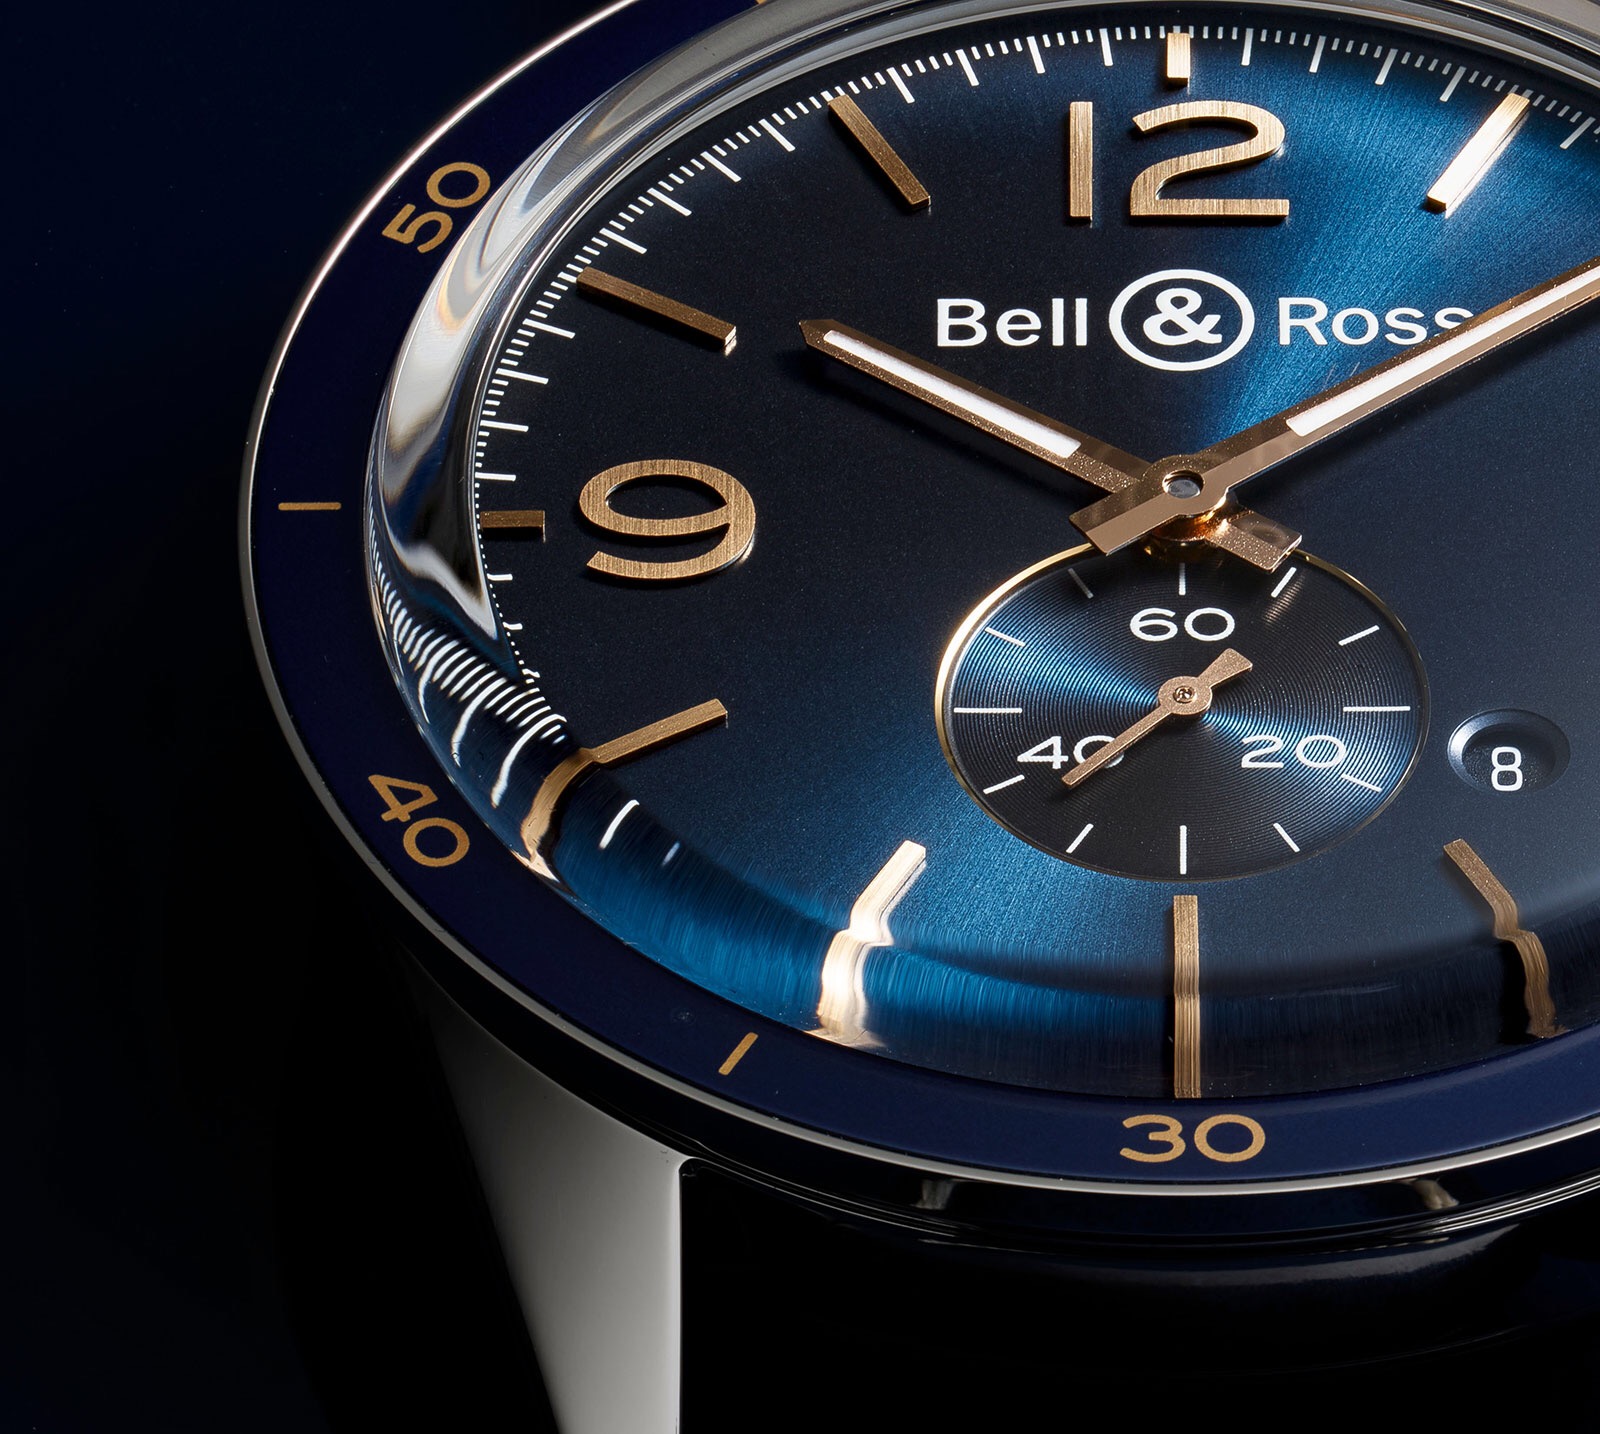 Bell and ross. Bell and Ross 126 Vintage. IWC Bell Ross. Bell Ross Vintage. Bell & Ross Vintage br Aeronavale.